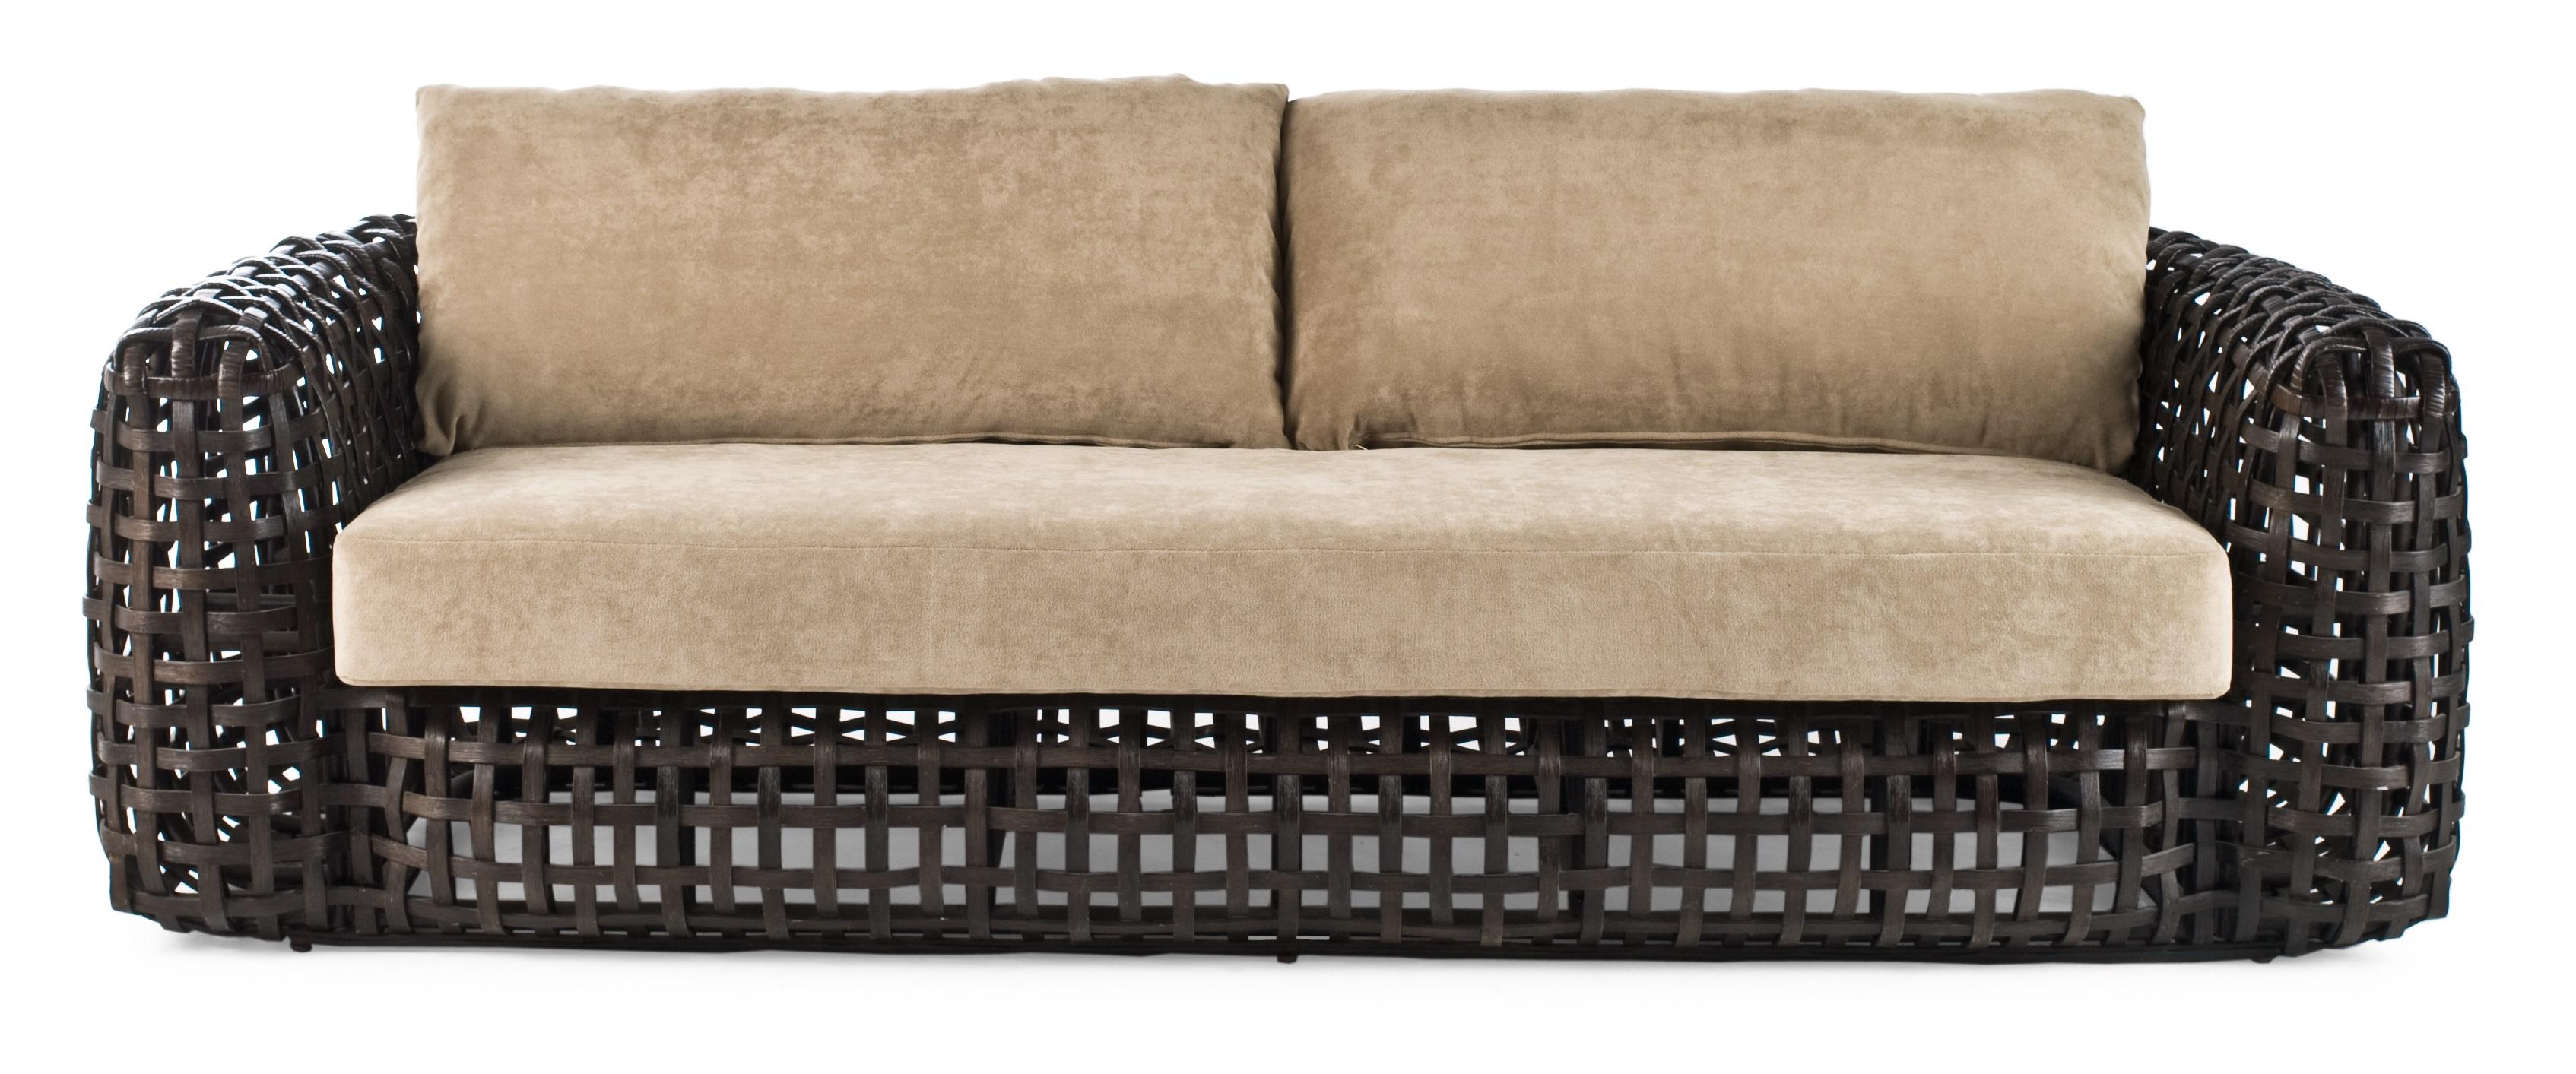 Indoor matilda sofa by Kenneth Cobonpue.
Materials: Rattan.
Also available in other colors and for outdoors.
Dimensions: 100cm x 230 cm x H 63cm.

The same principle of a woven basket is used in making Matilda. This vast collection of tables,